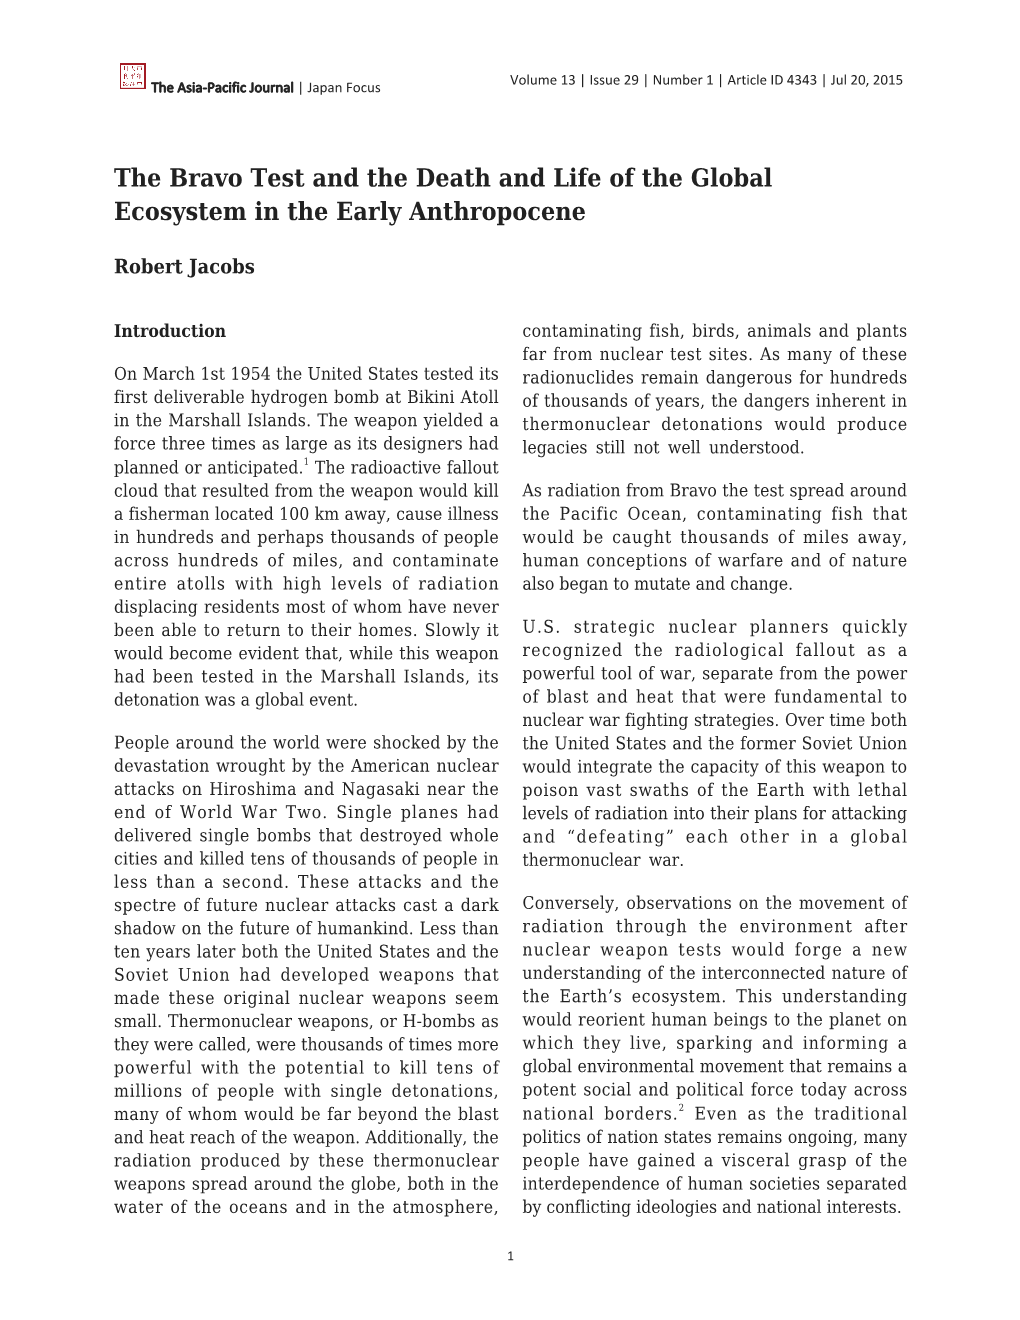 The Bravo Test and the Death and Life of the Global Ecosystem in the Early Anthropocene